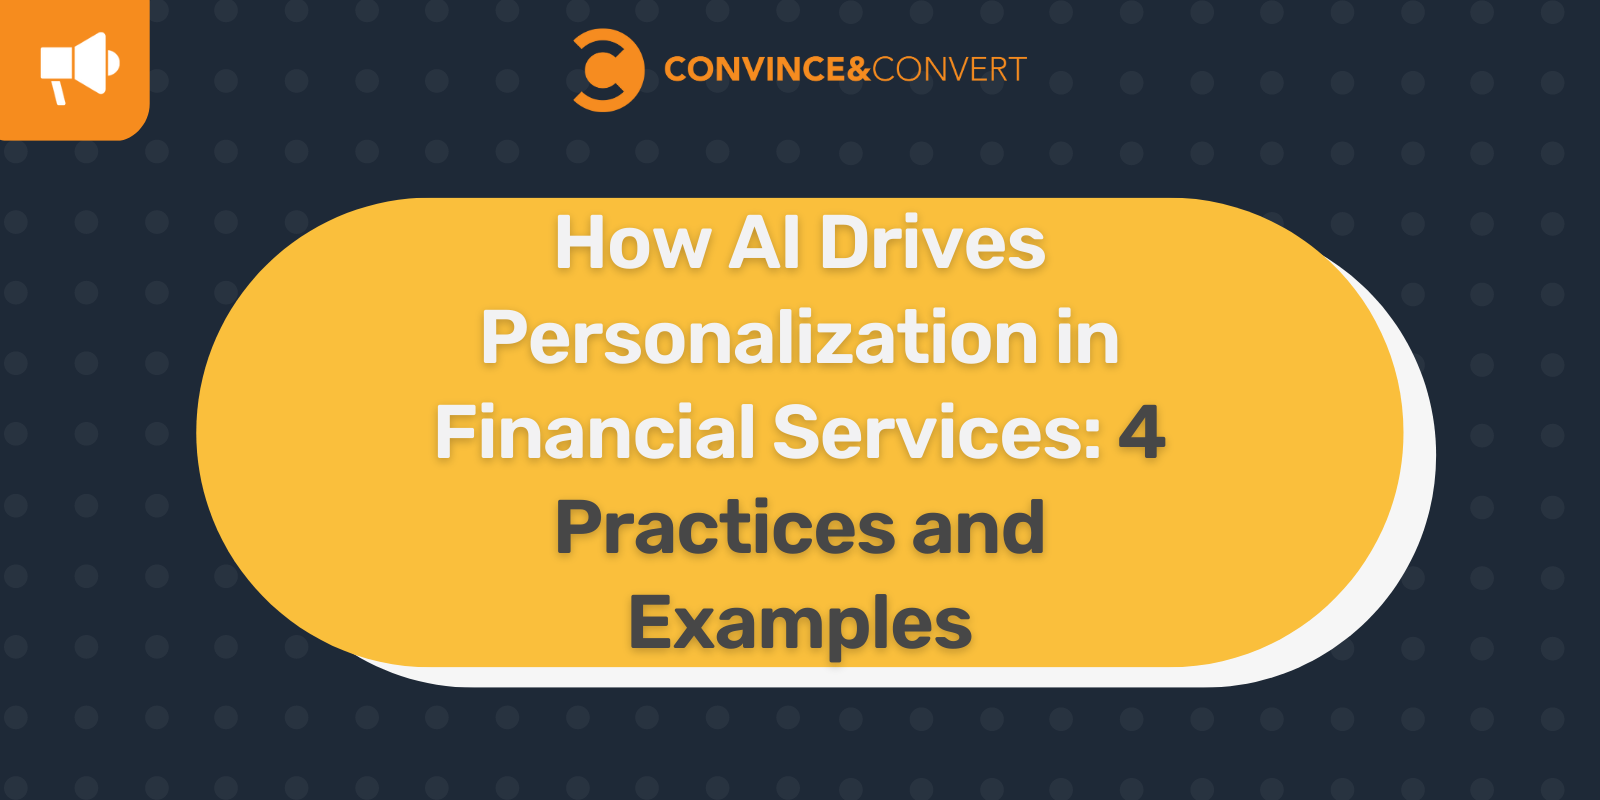 You are currently viewing How AI Drives Personalization in Financial Services: 4 Practices and Examples